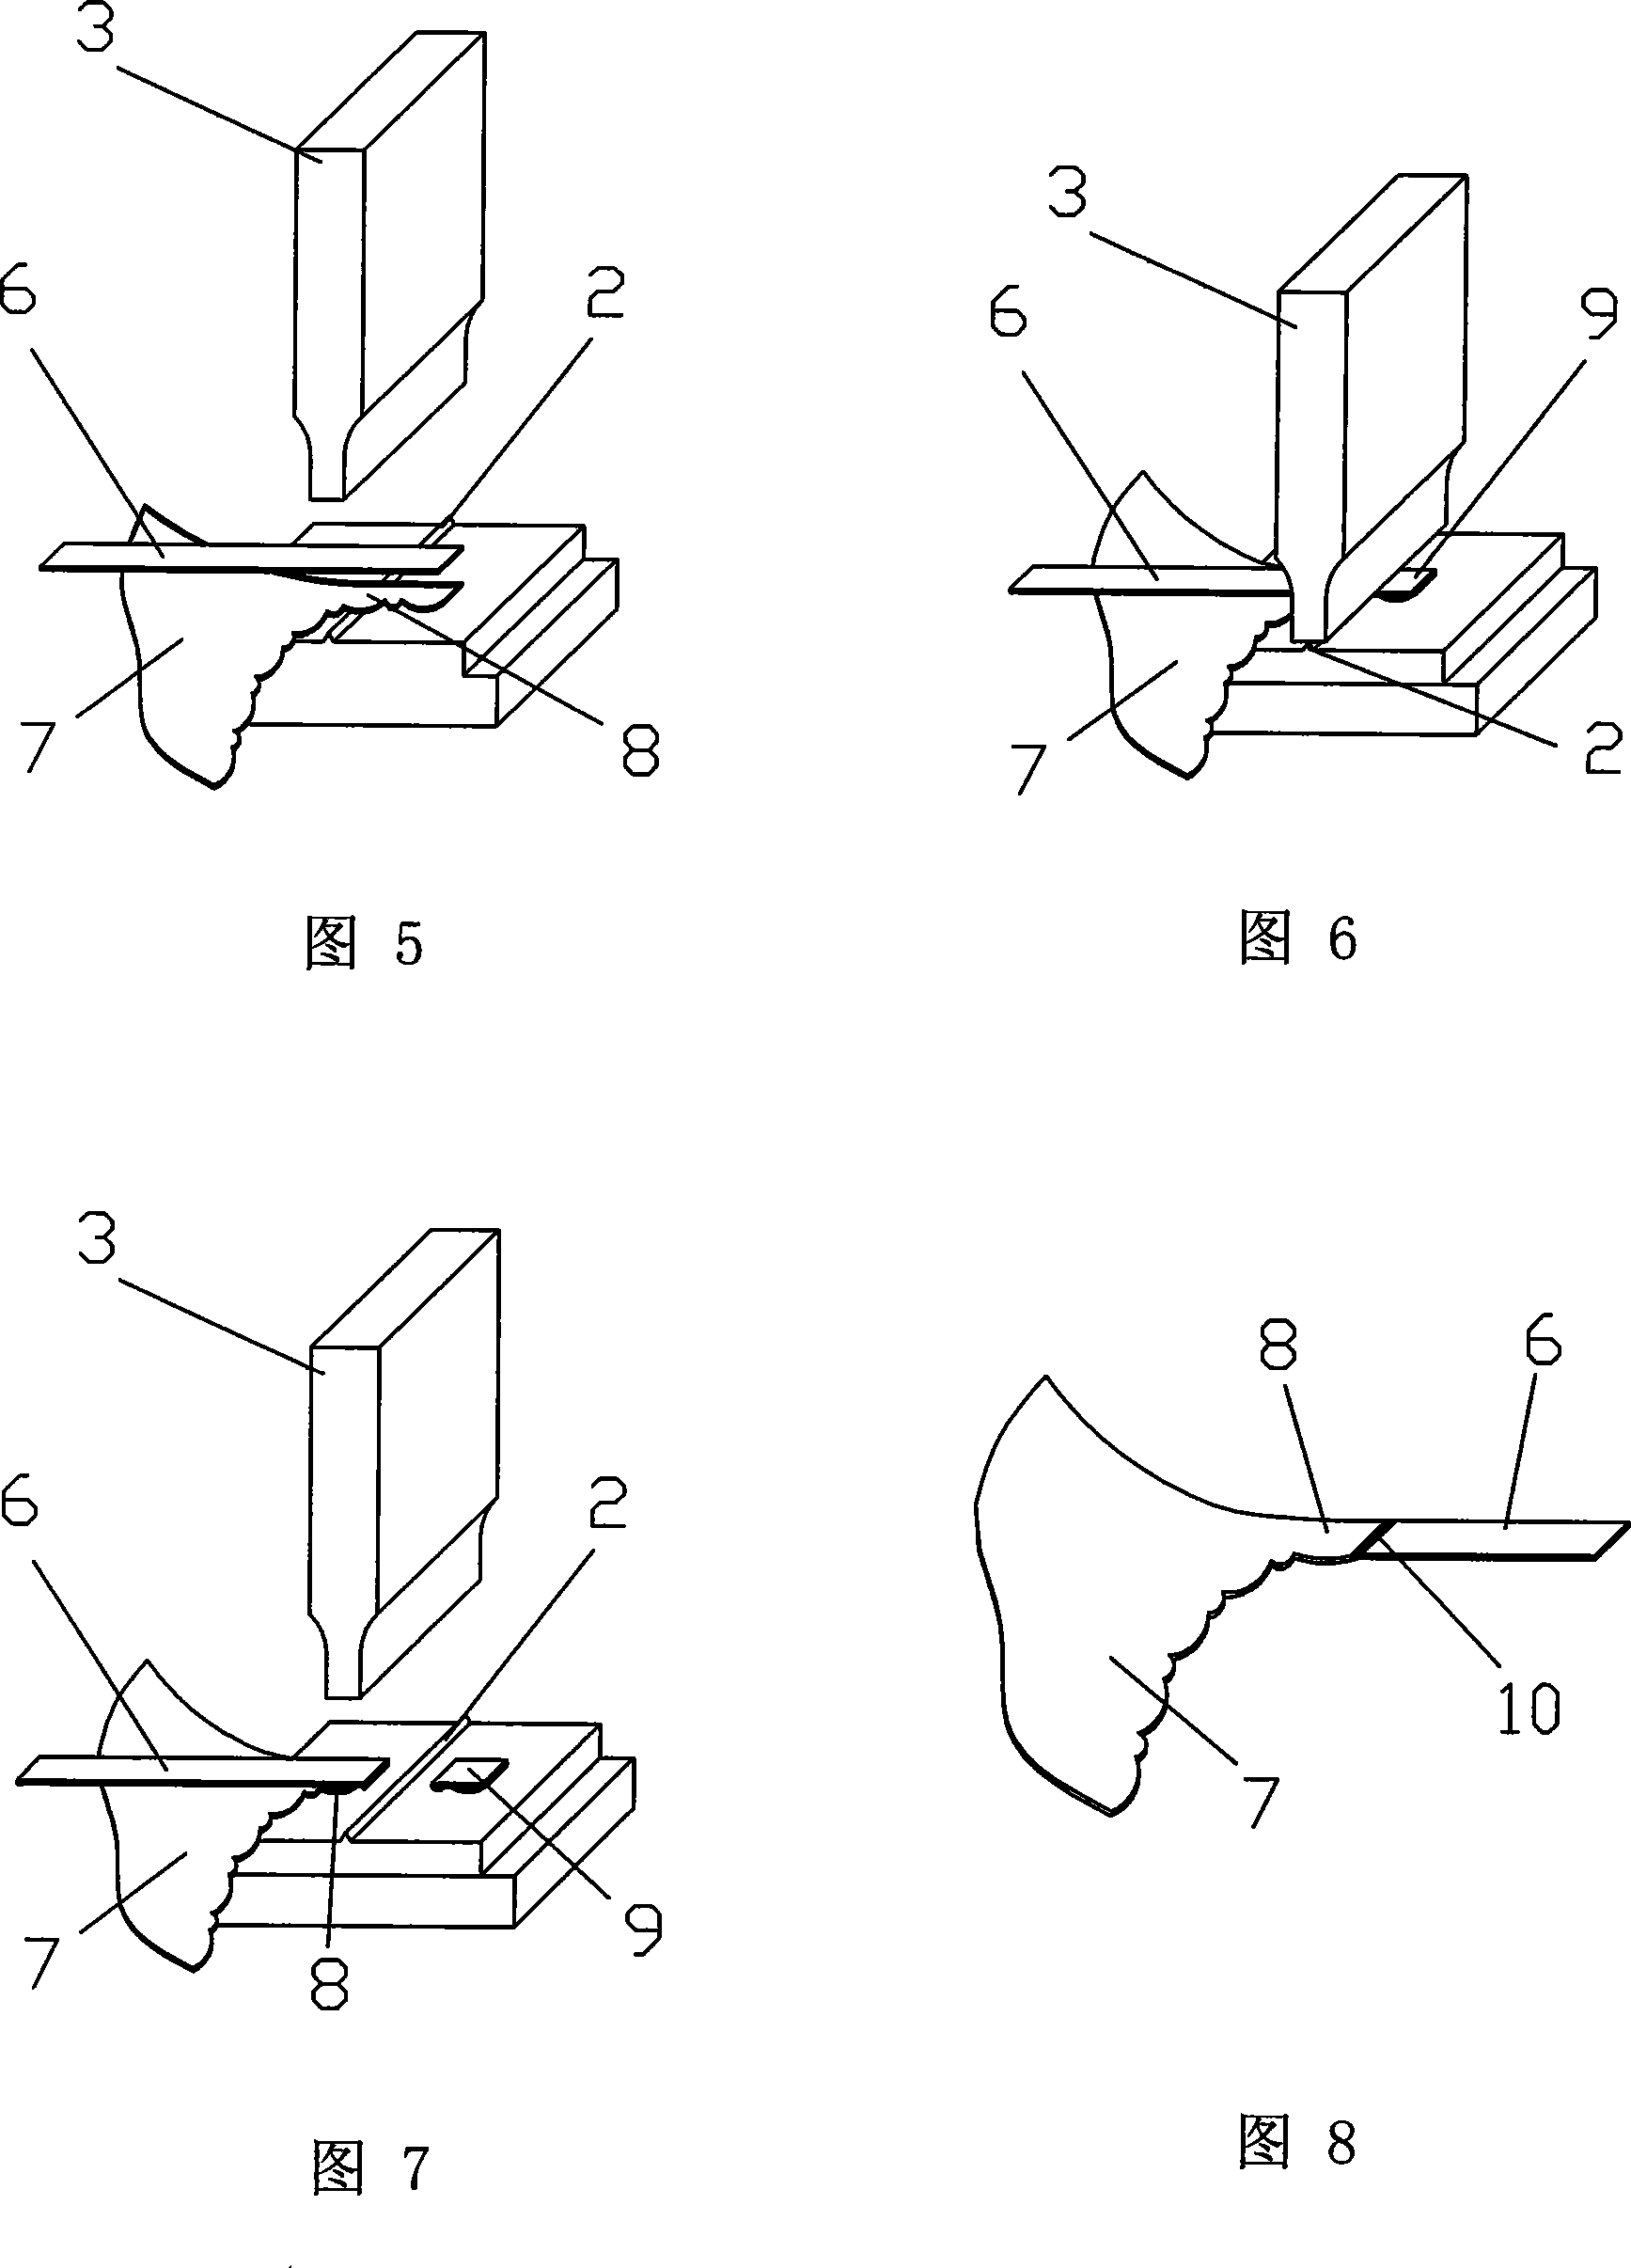 Method of soldering and cutting as well as connecting by ultrasound wave